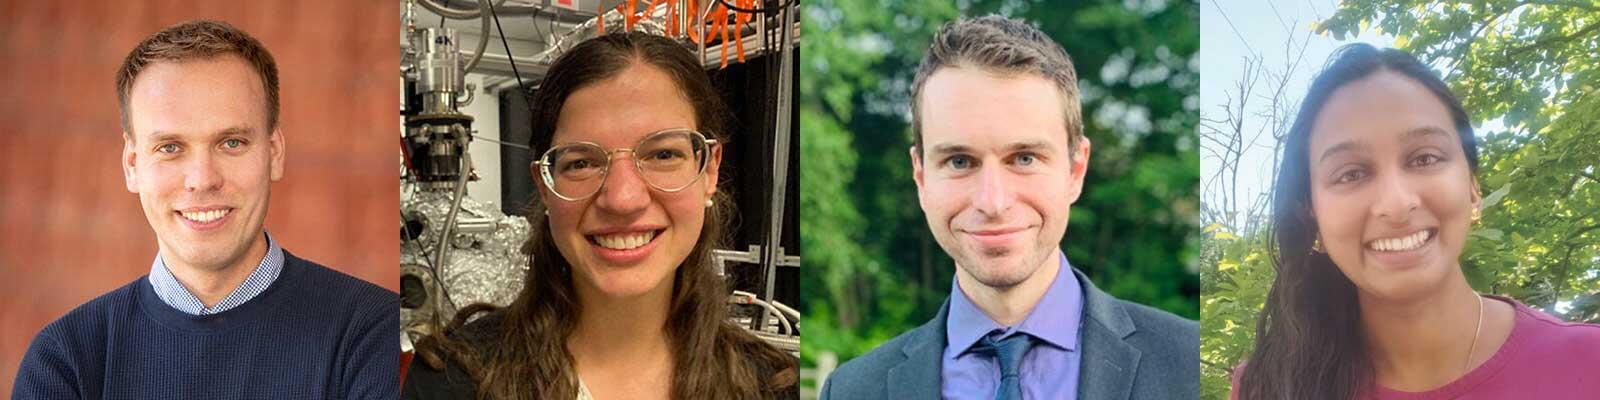 The College is delighted to welcome our newest chemistry and chemical and biomolecular engineering faculty members Hendrik Utzat, Jennifer Bergner, Robert Saxton, and Aditi Krishnapriyan.